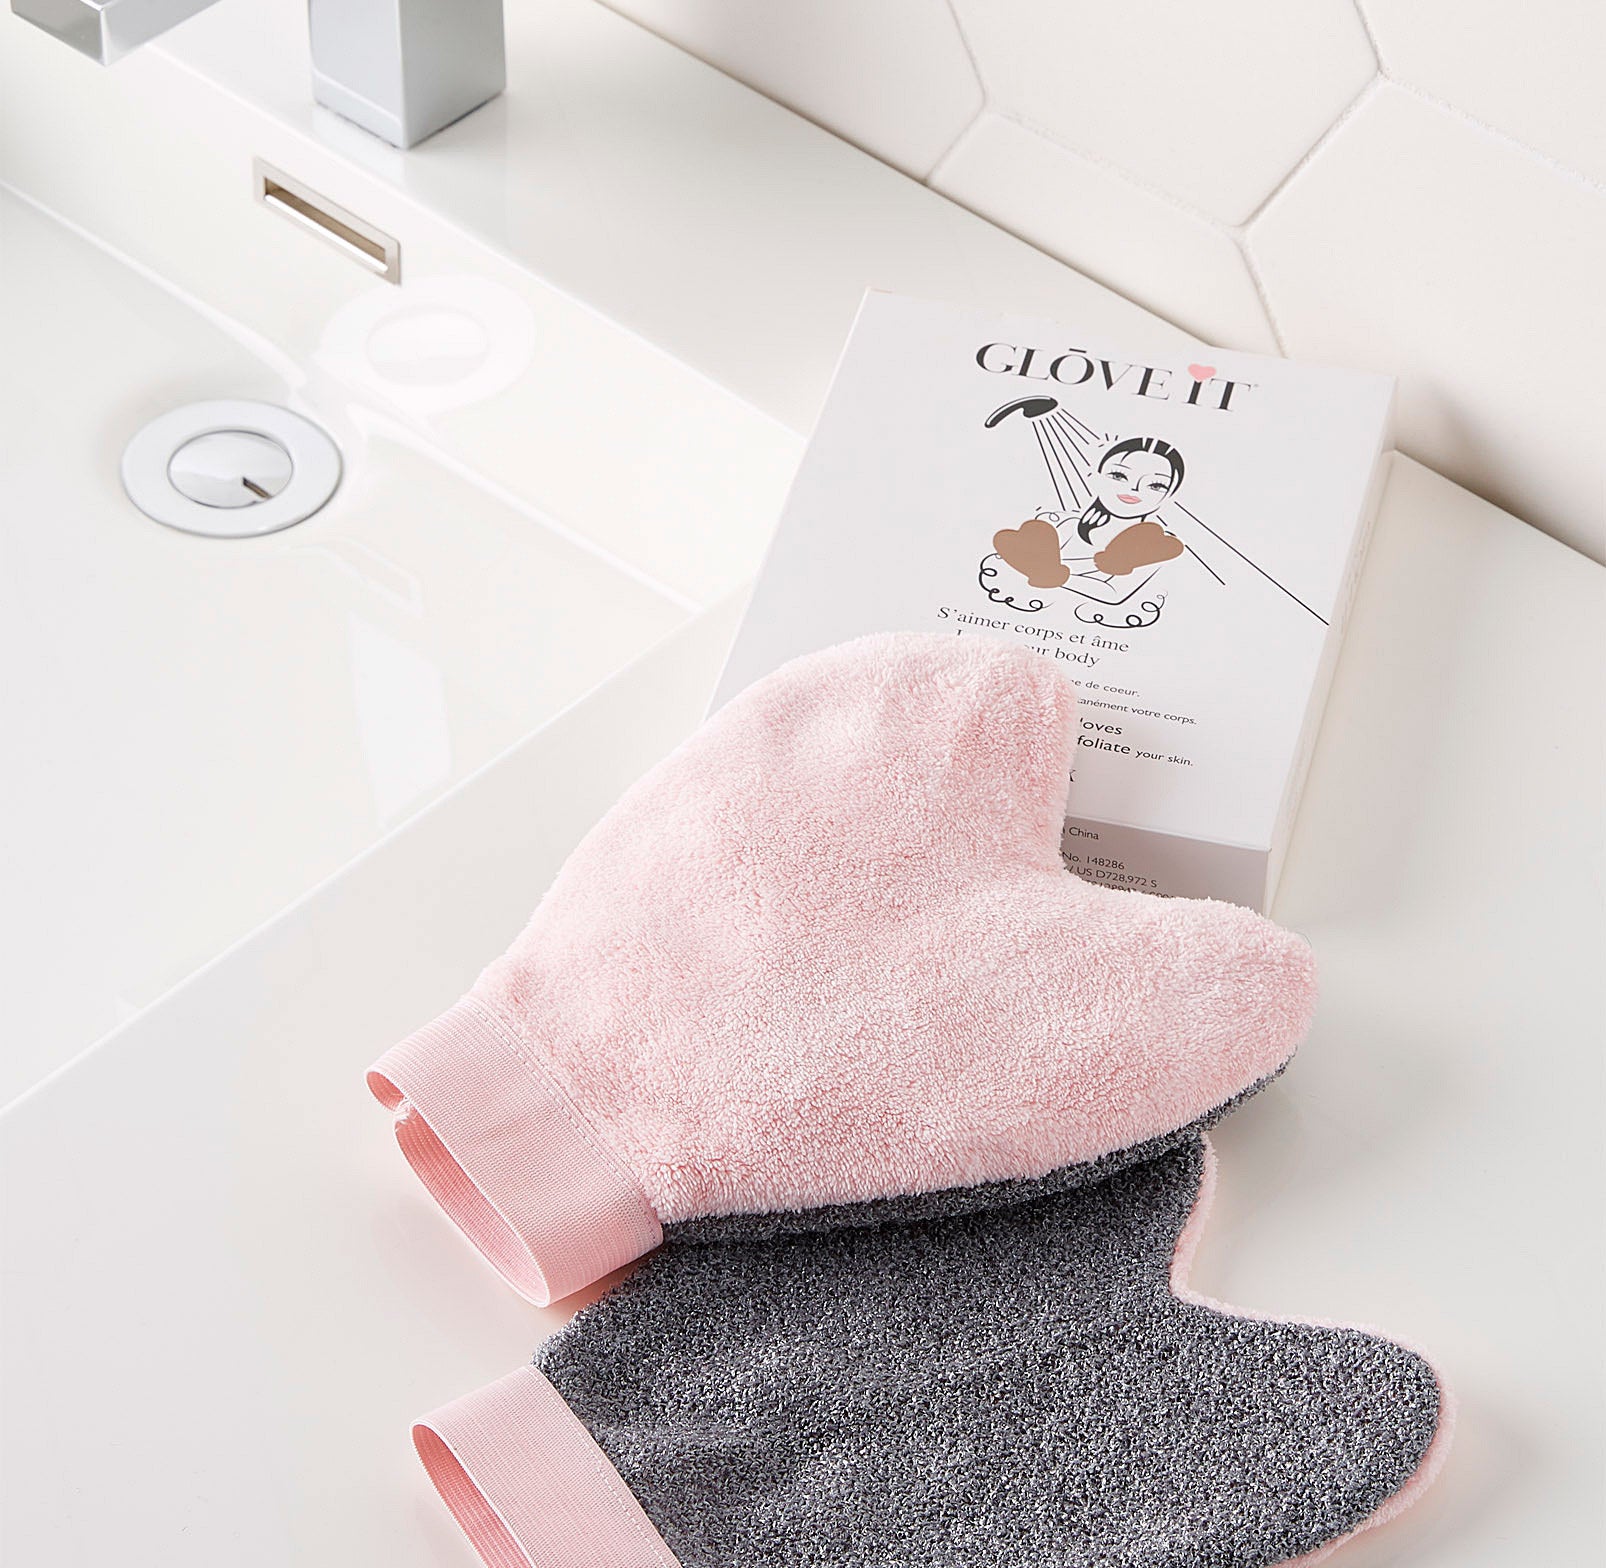 A pair of cloth gloves on bathroom counter